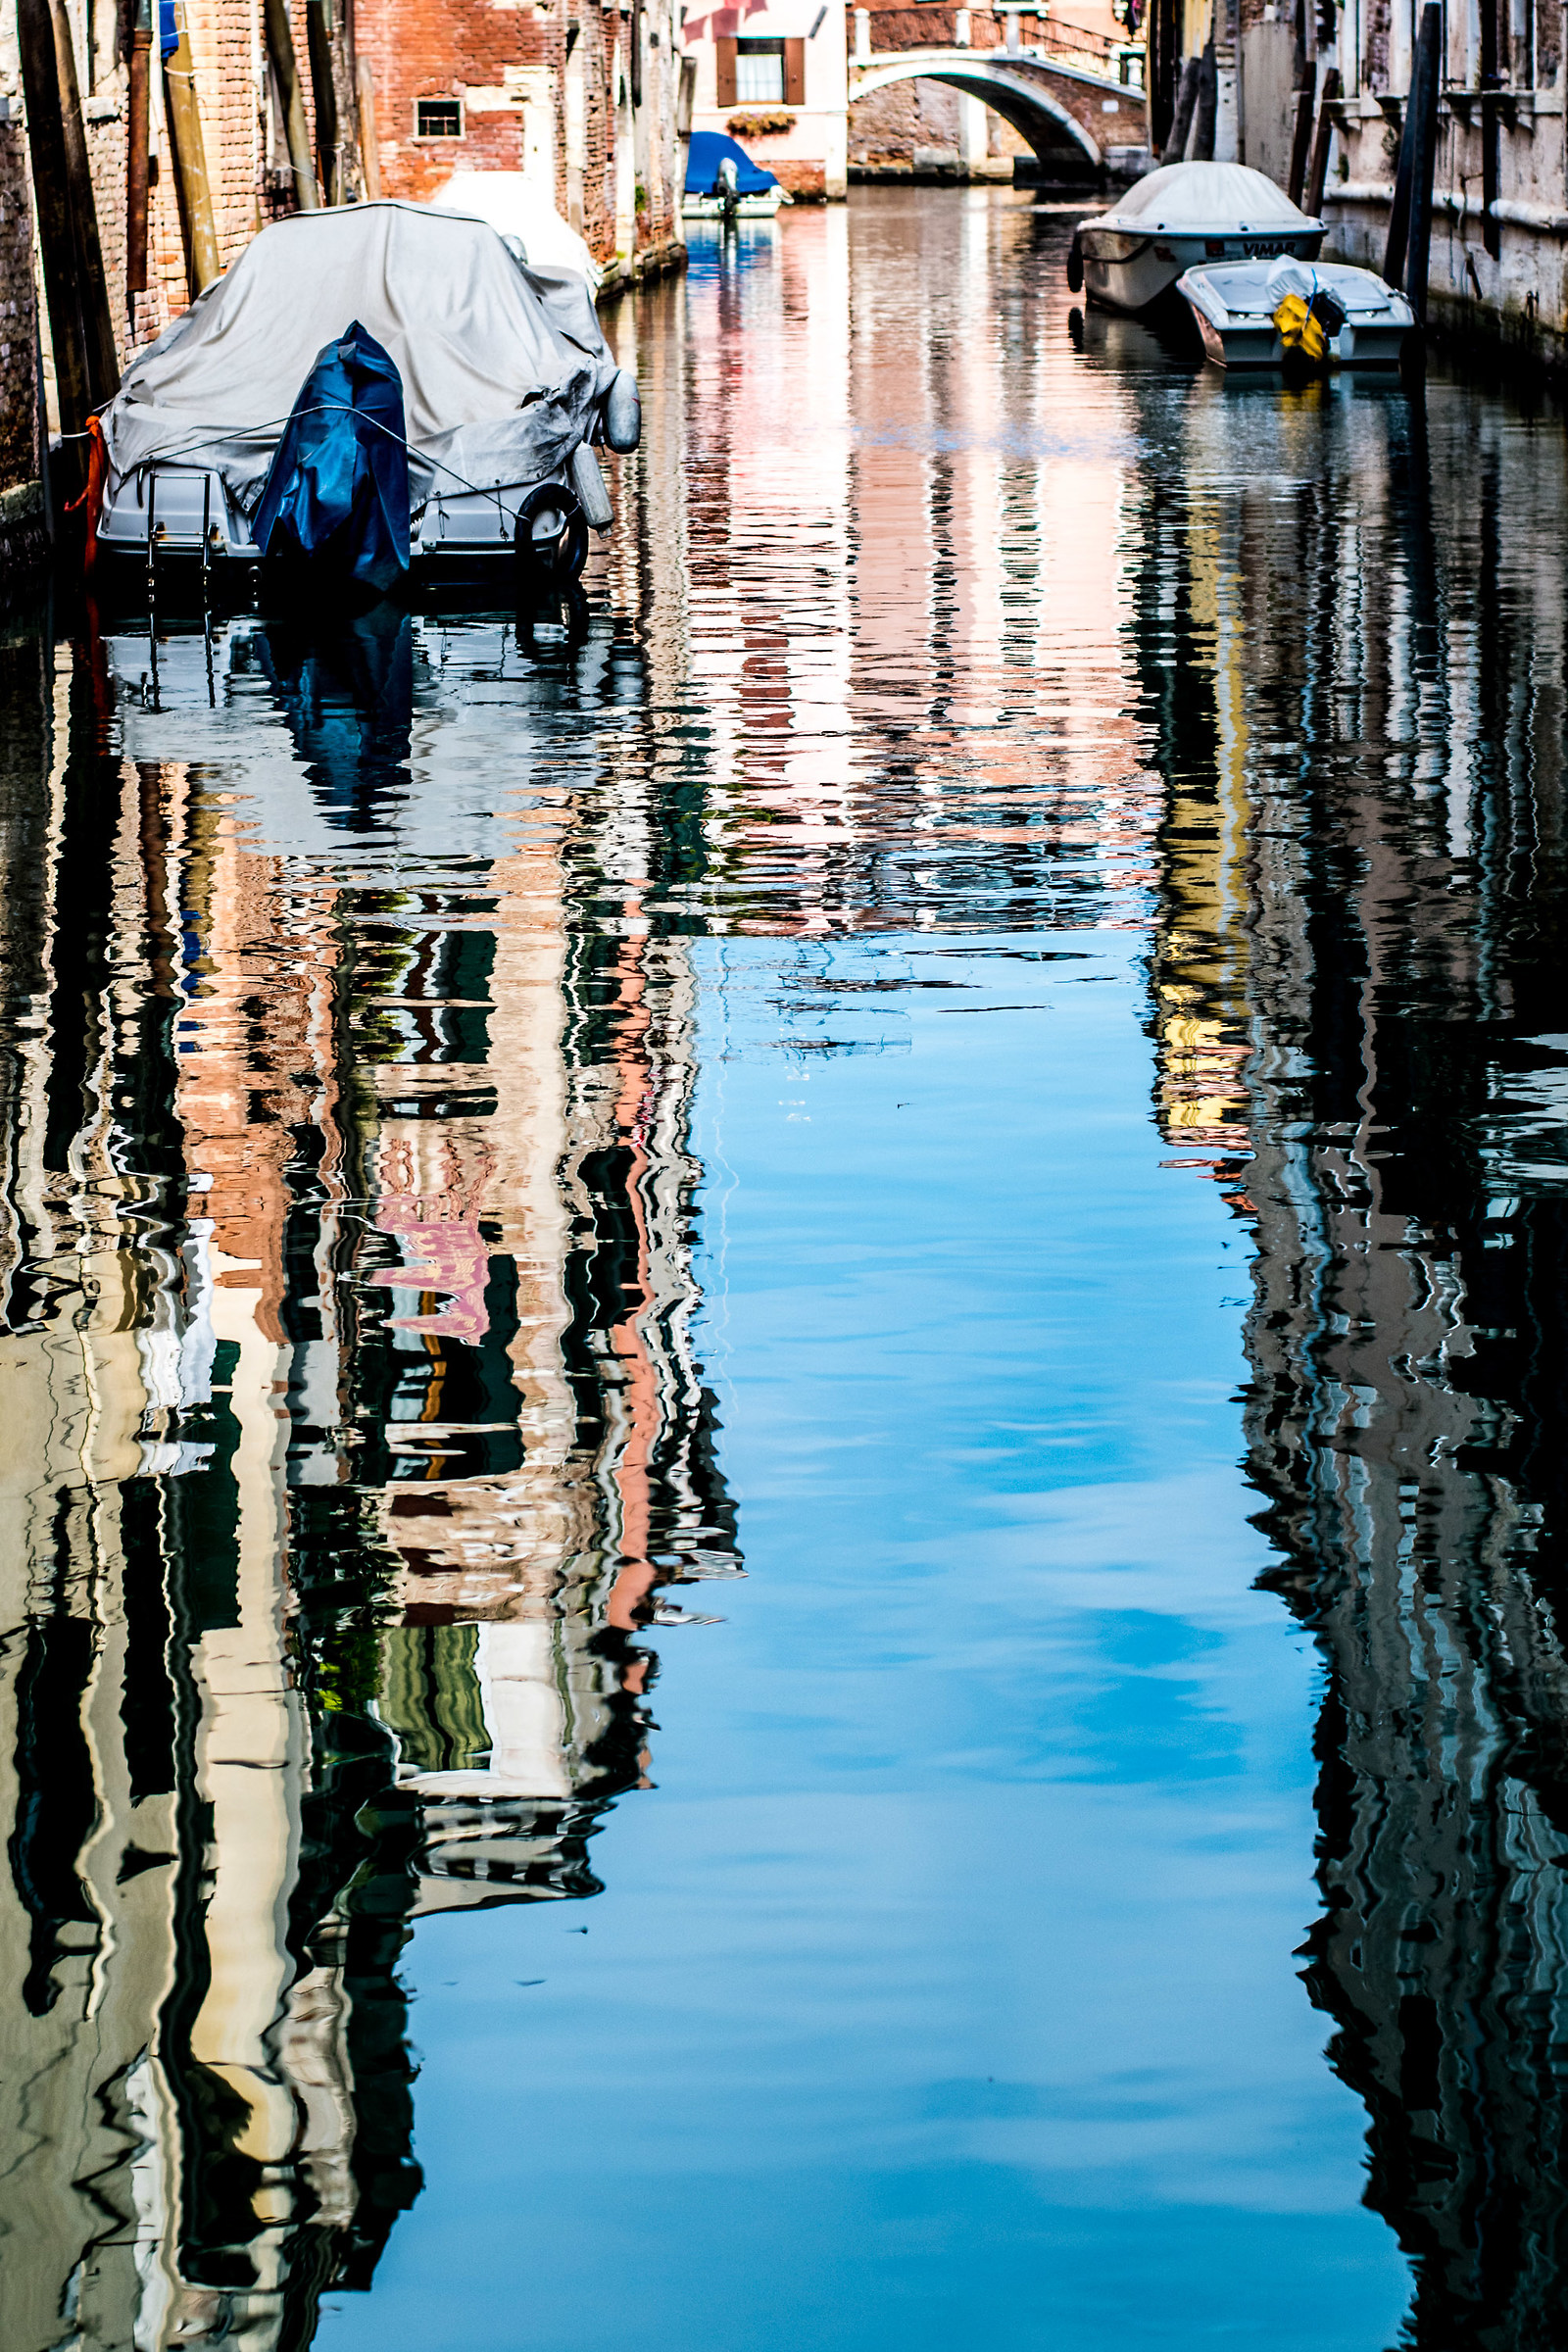 Water reflections - Venice - Italy...